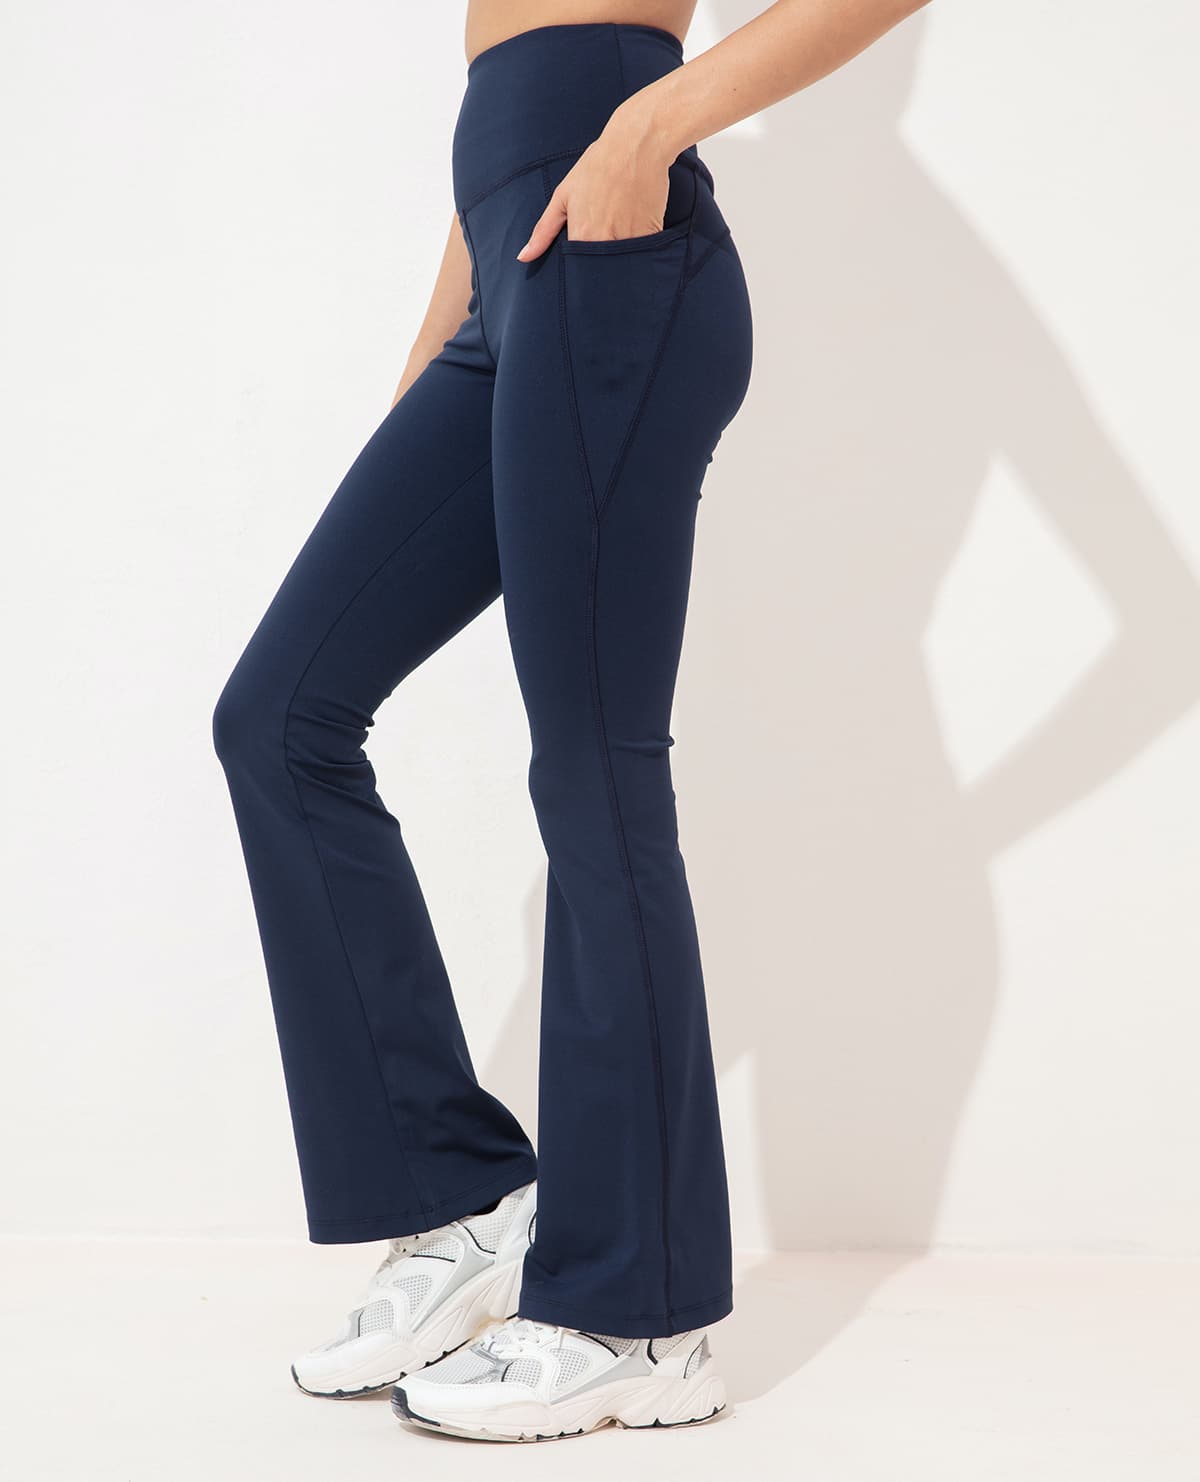 Flare Pants - Wear for Yoga, Walking, Casual Outings – Kica Activ